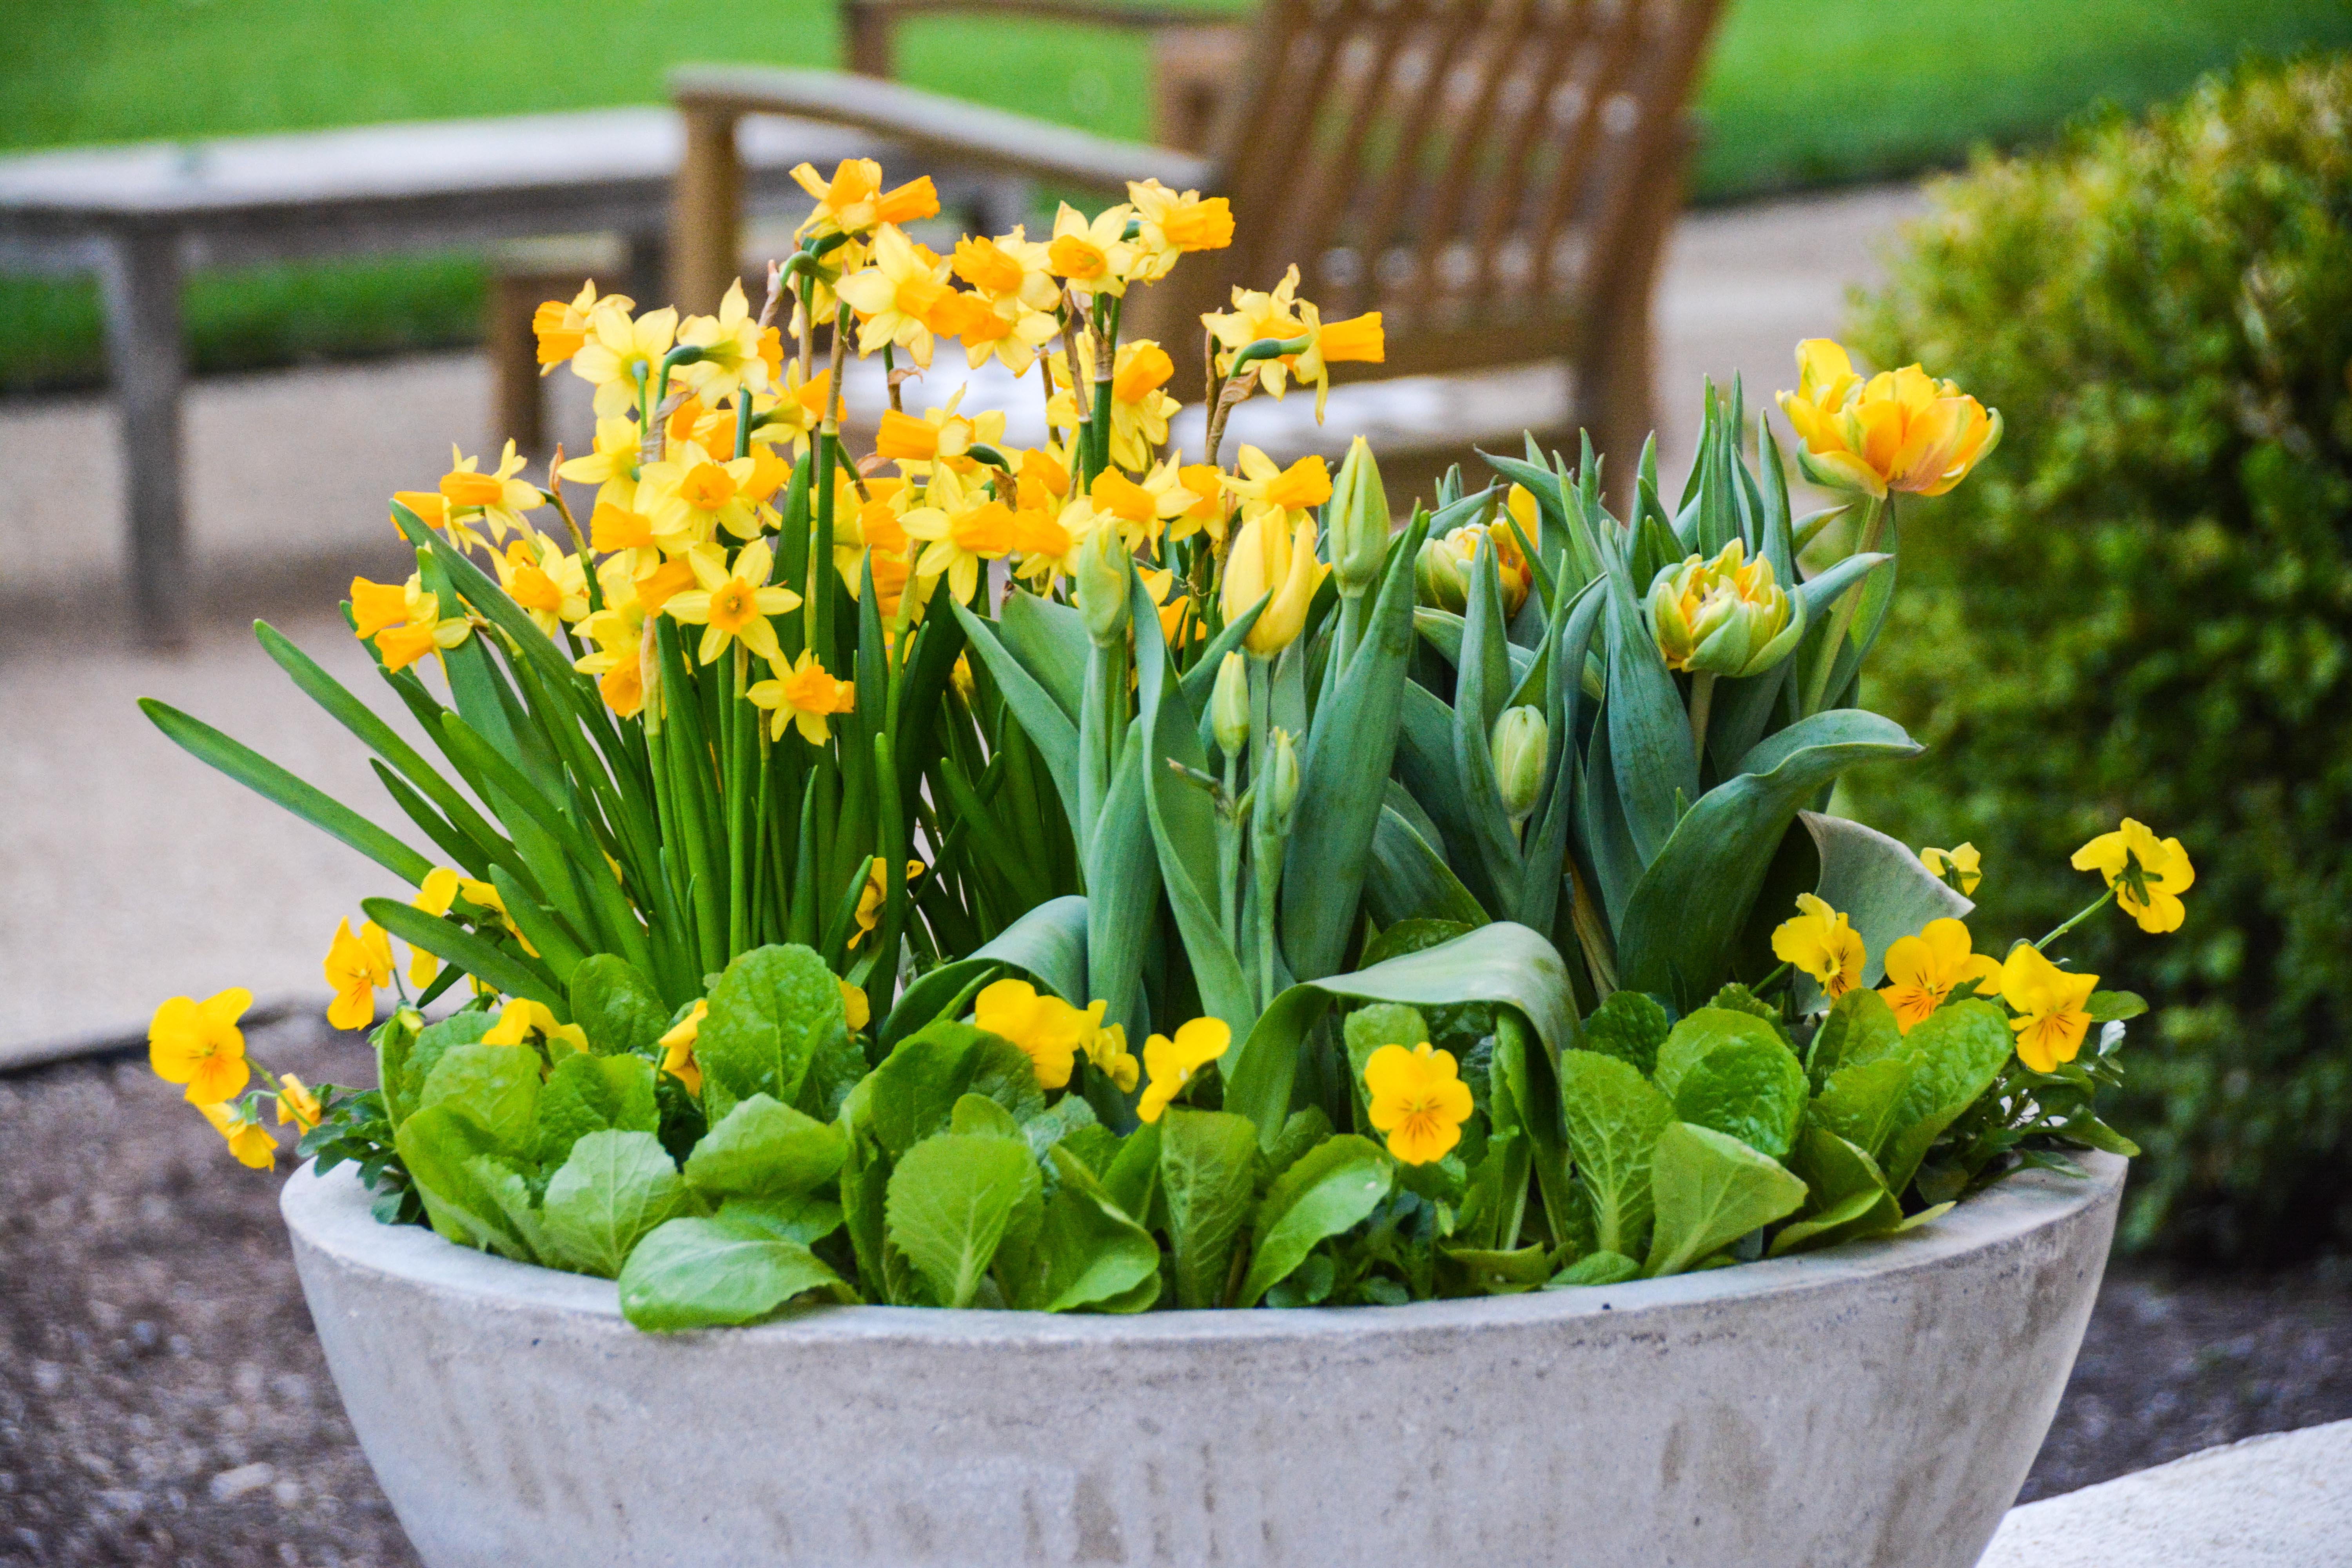 container features Narcissus Cyclamineus tete tete mixed with yellow tulips and violas in a bed of lettuce. Daffodils (Narcissus) for every garden size. Ideas for containers, woodland and bed placement for spring bulbs. More at Thinkingoutsidetheboxwood.com